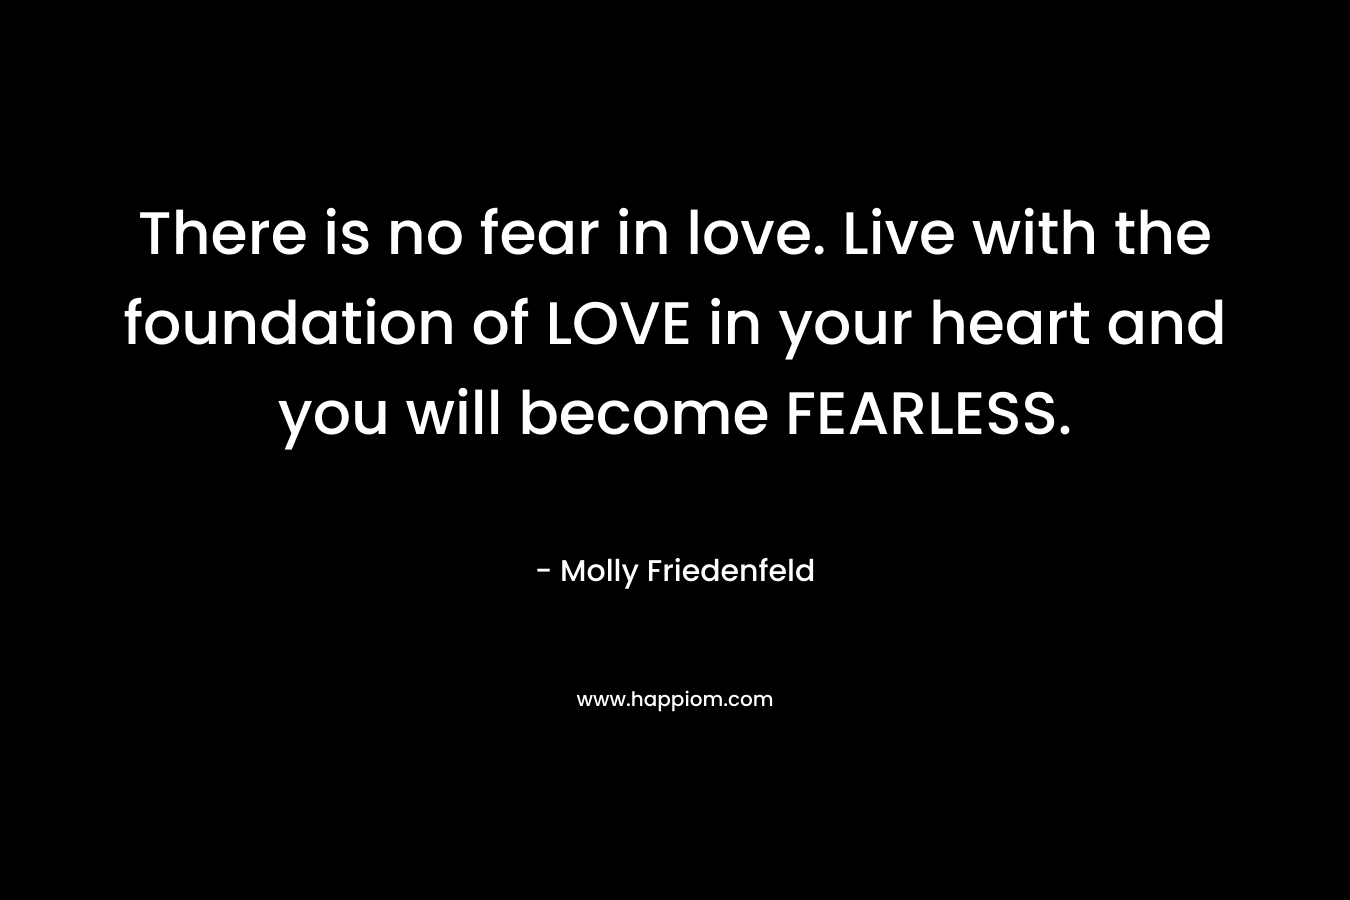 There is no fear in love. Live with the foundation of LOVE in your heart and you will become FEARLESS. – Molly Friedenfeld